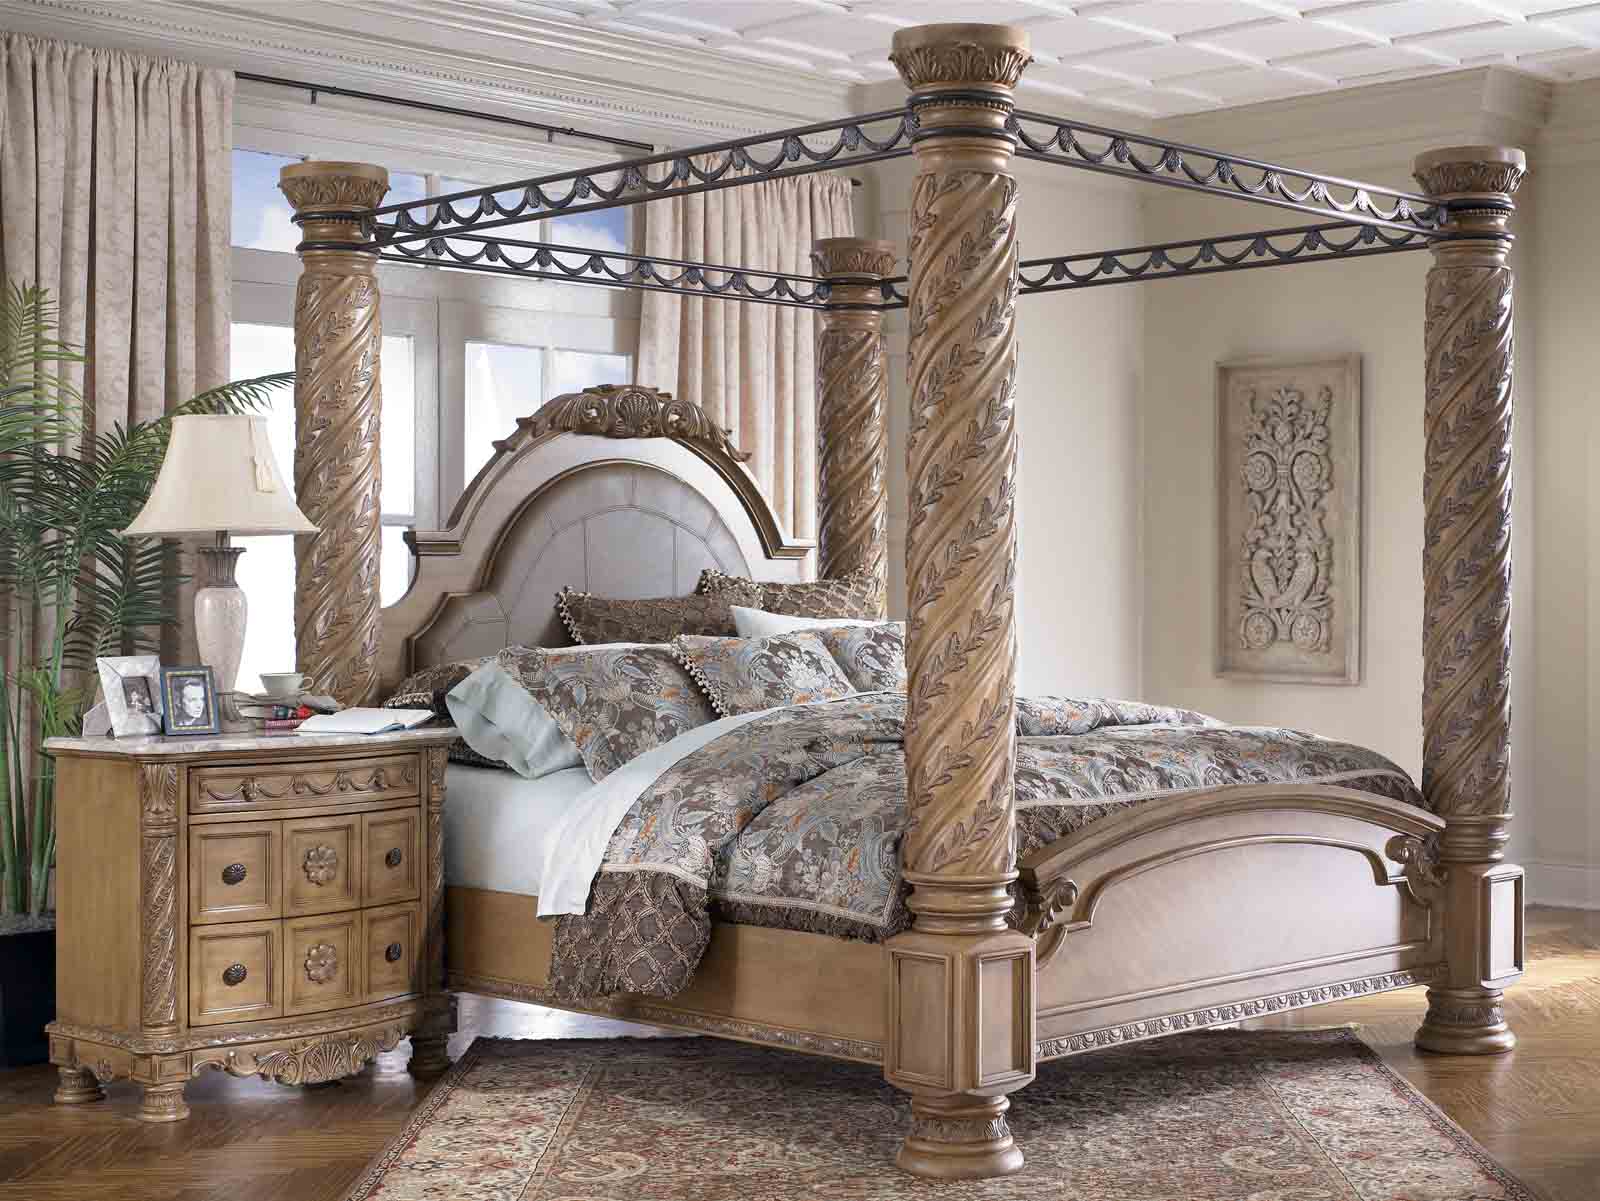 Unique Canopy Beds Furniture for Best Inspirations Ideas